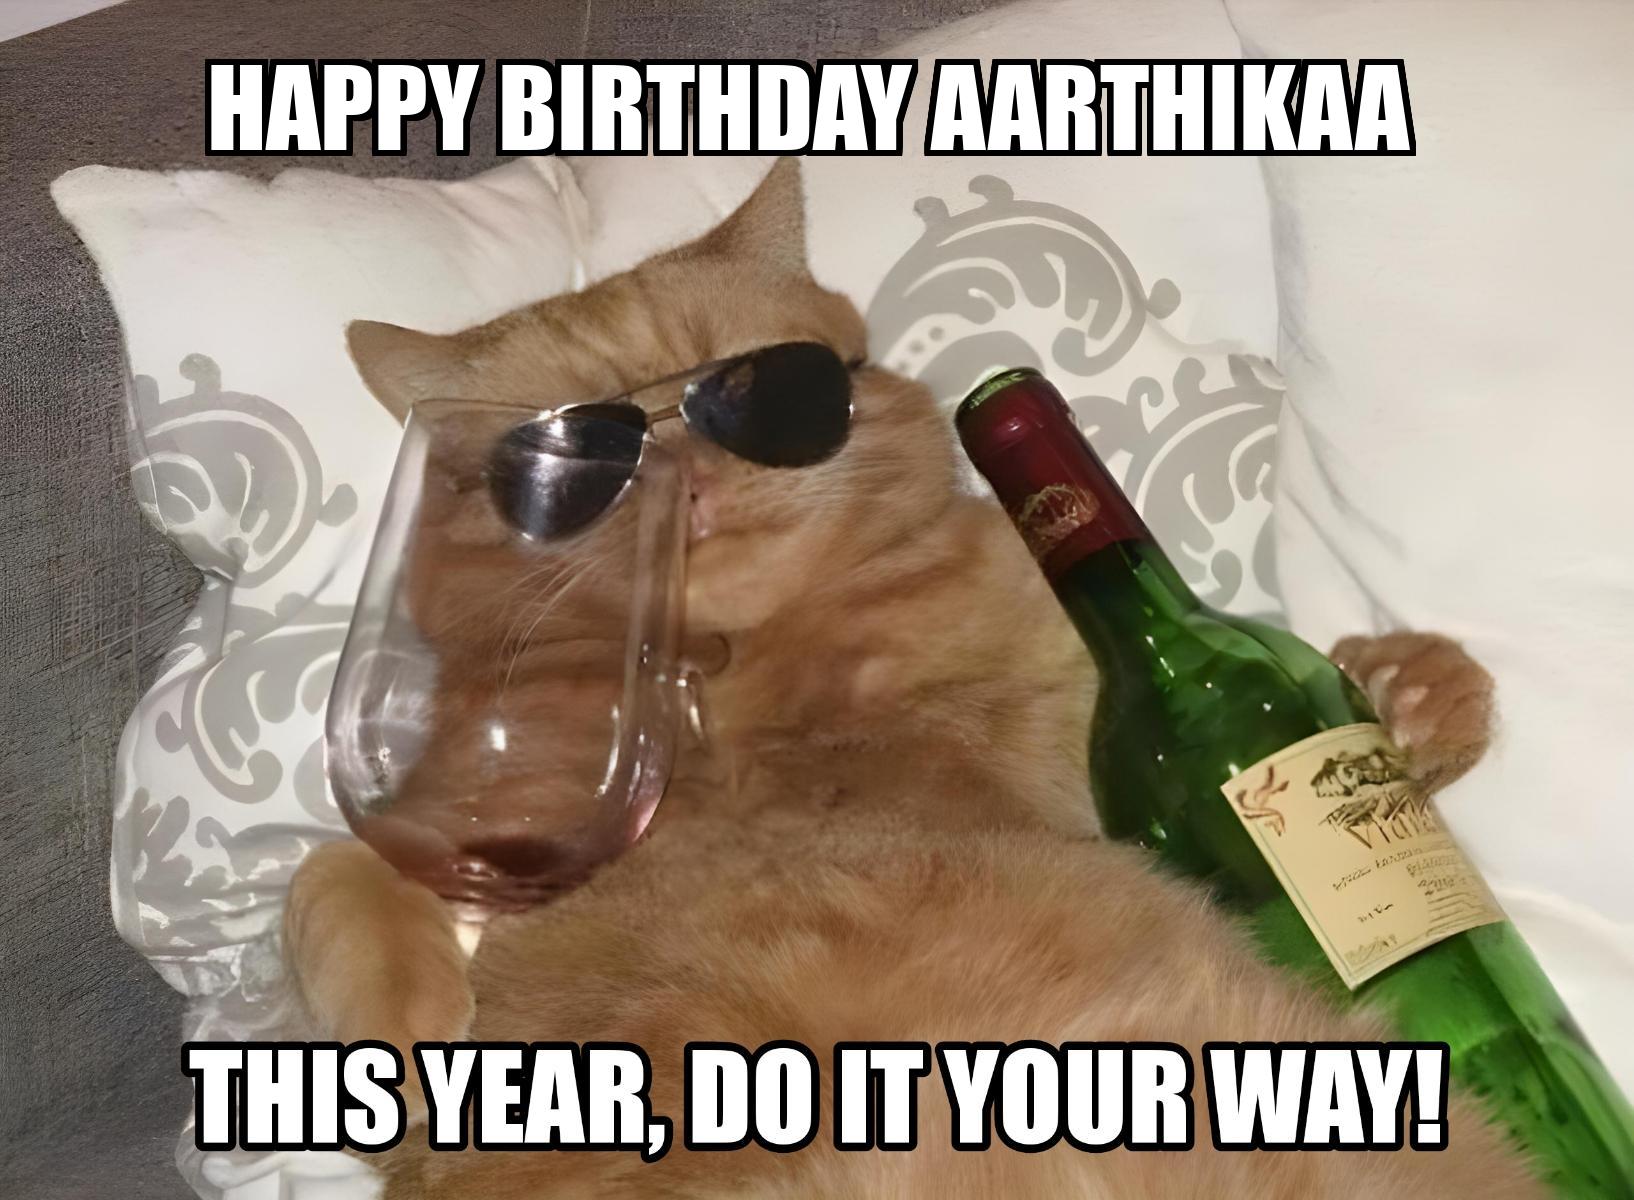 Happy Birthday Aarthikaa This Year Do It Your Way Meme